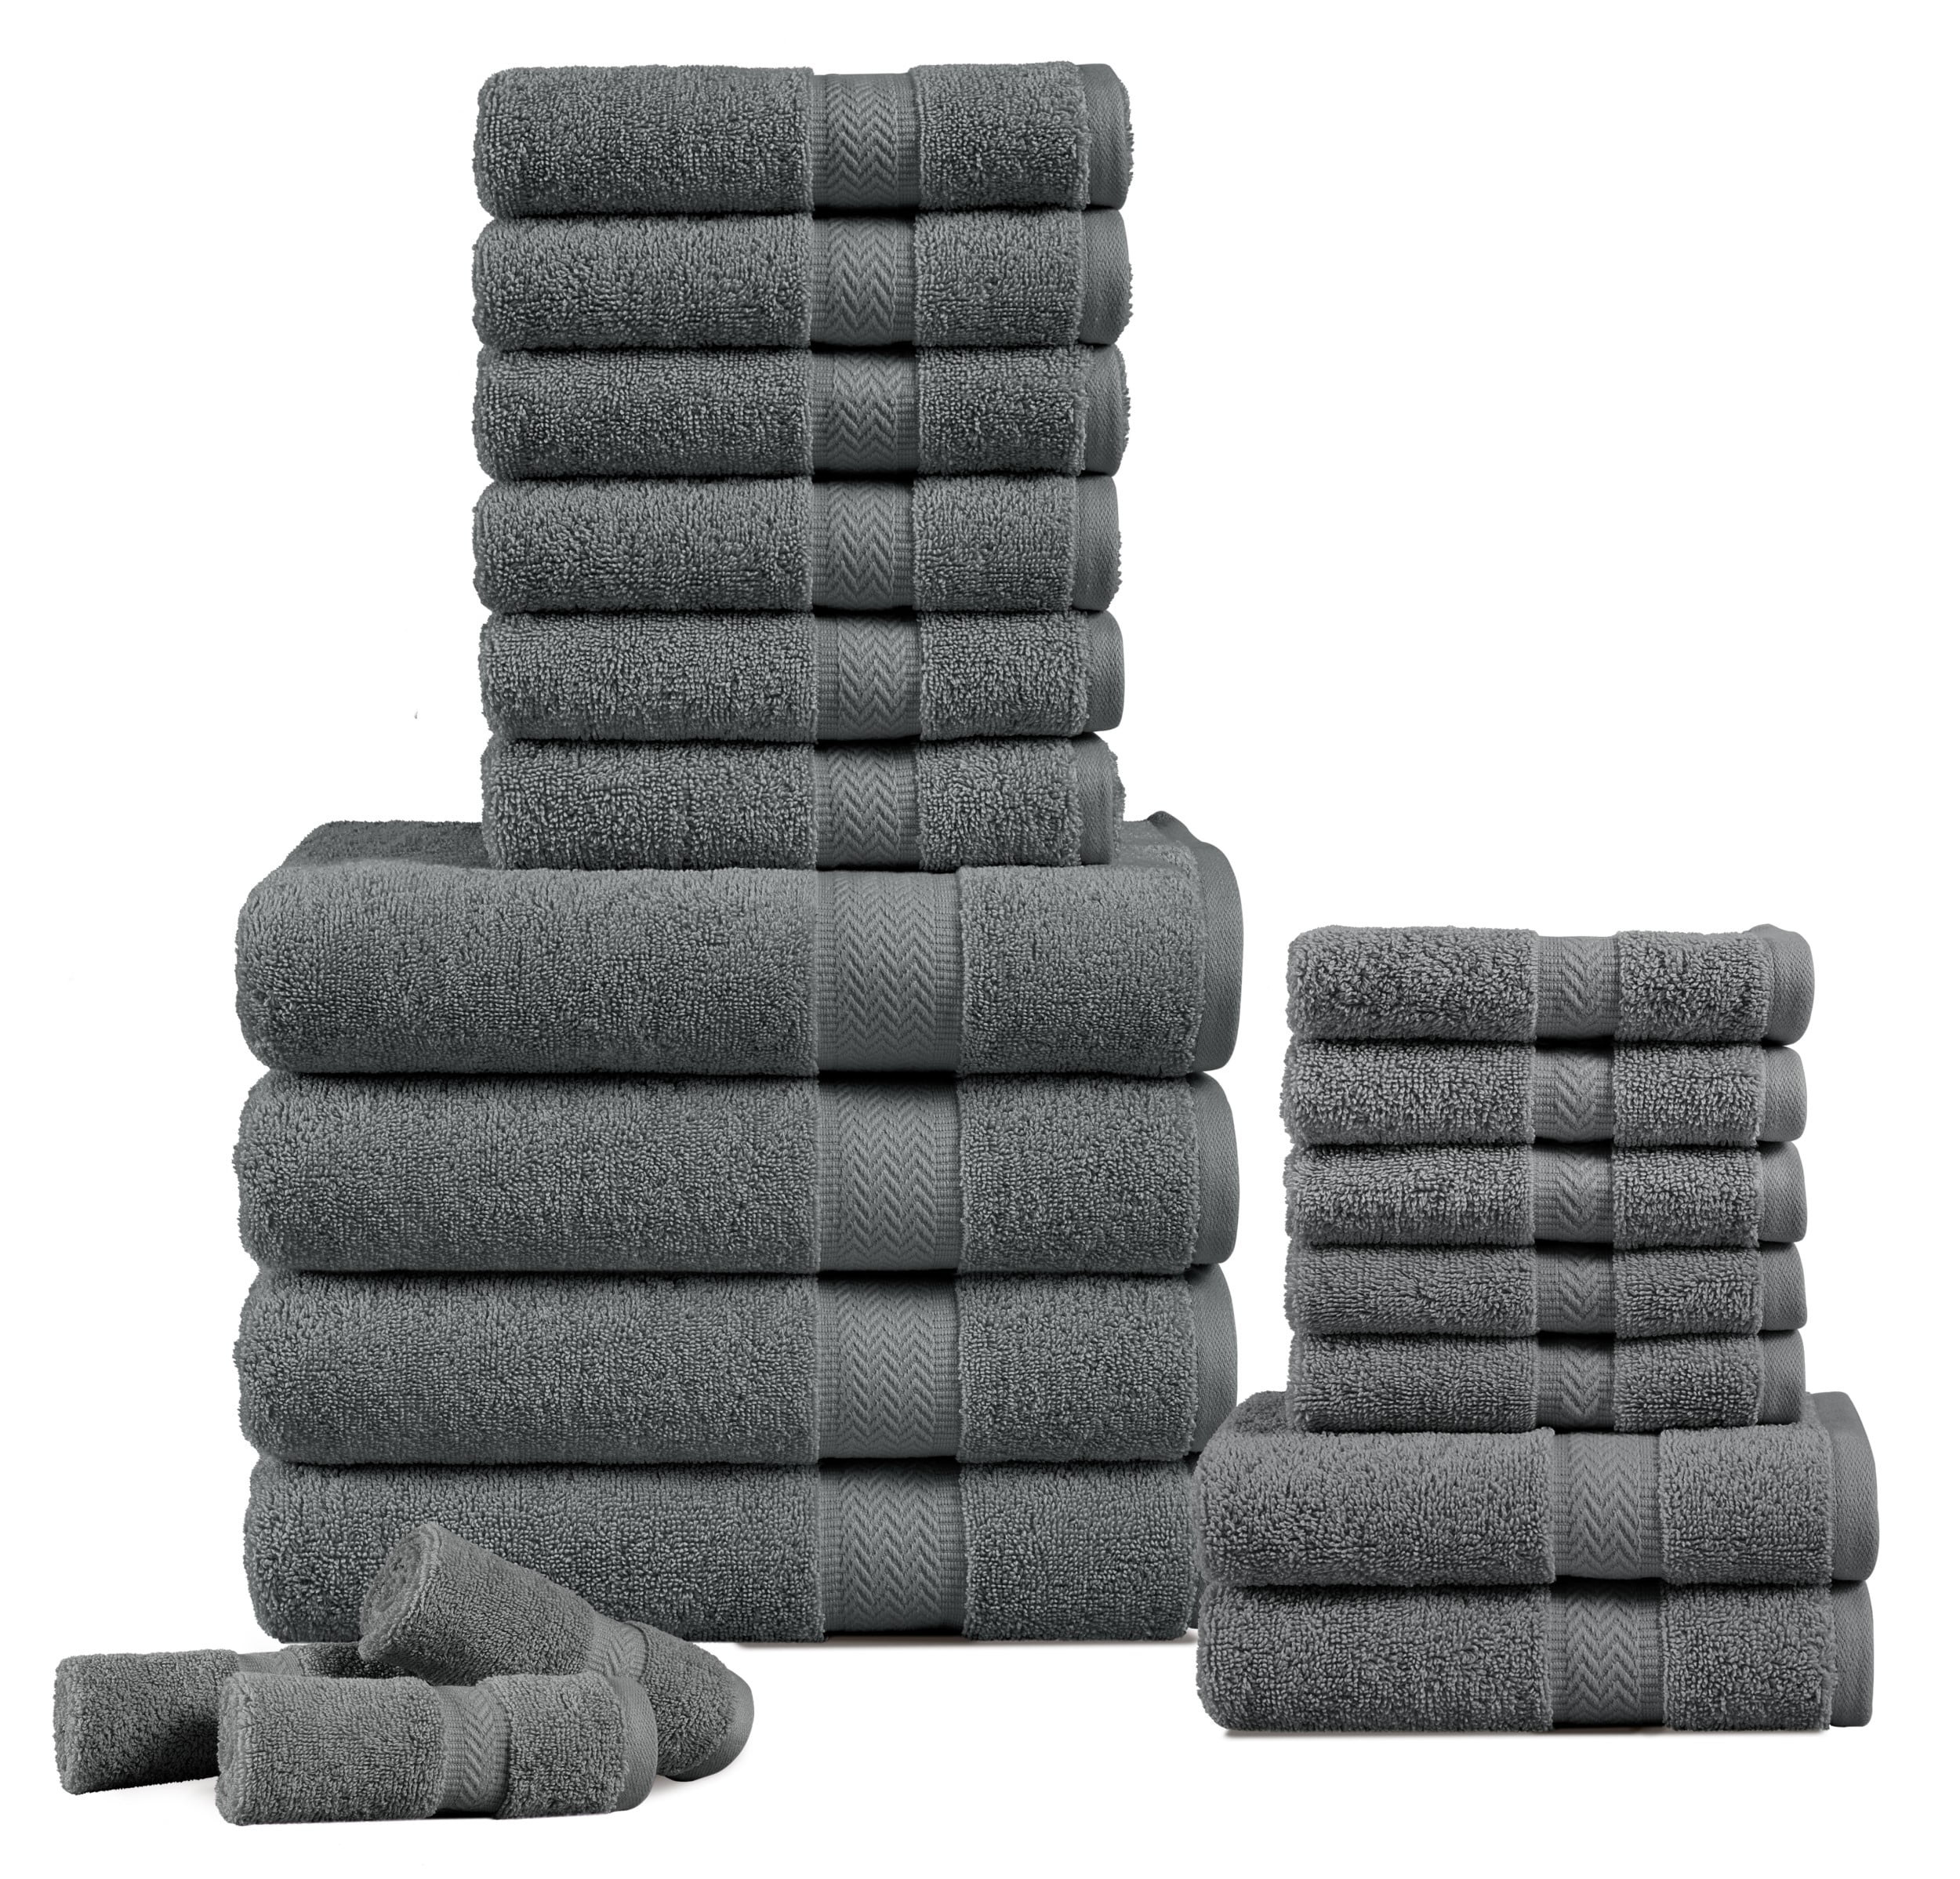 Towel Set | Shop Towels, Robes and Bath & Body from The Peabody at Home